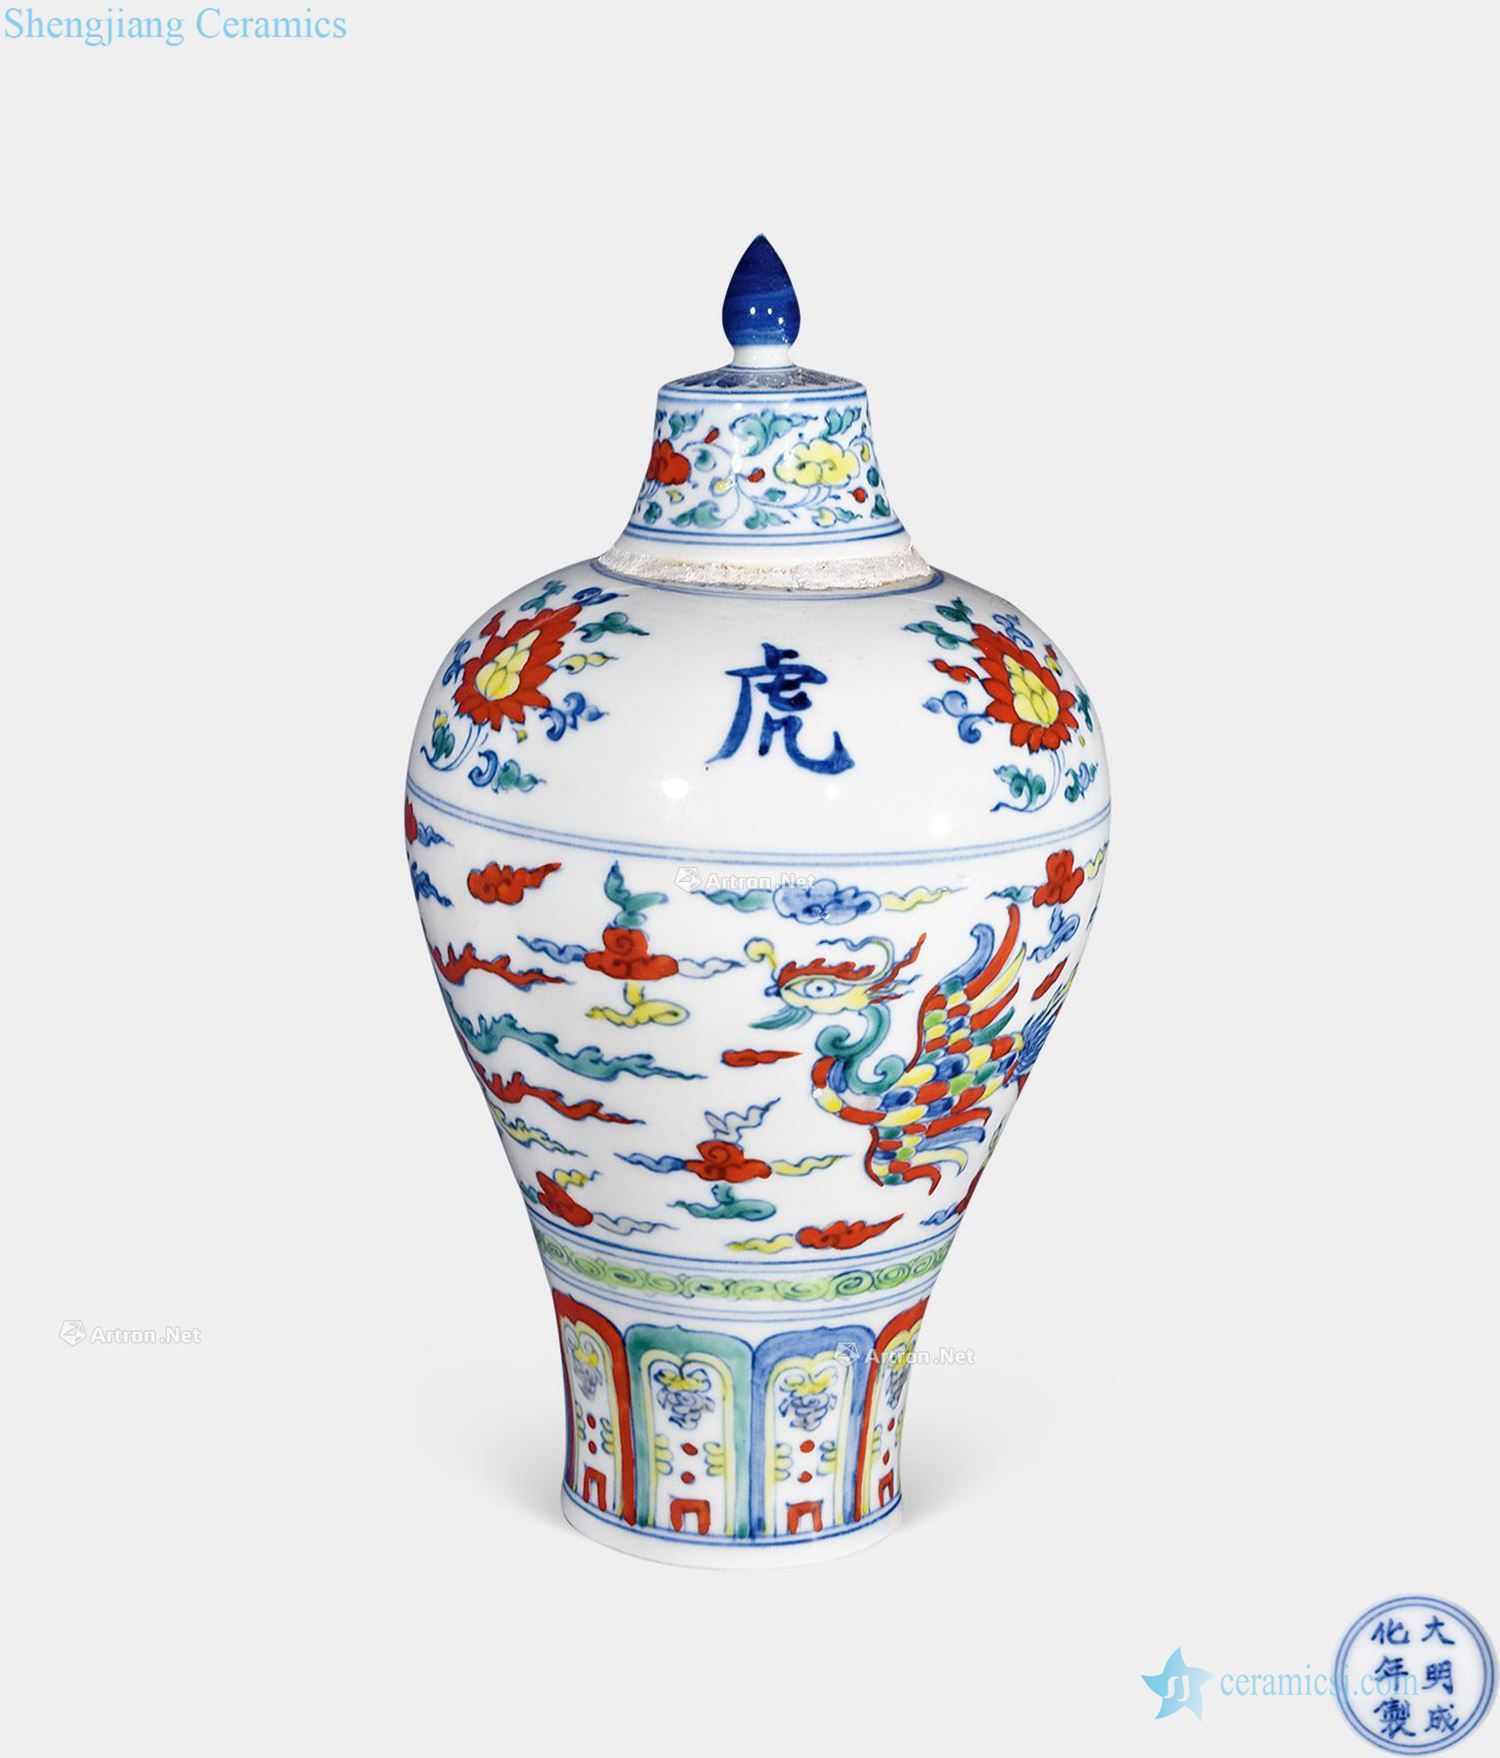 Ming Dou clouds grain mei bottle with a cover on it